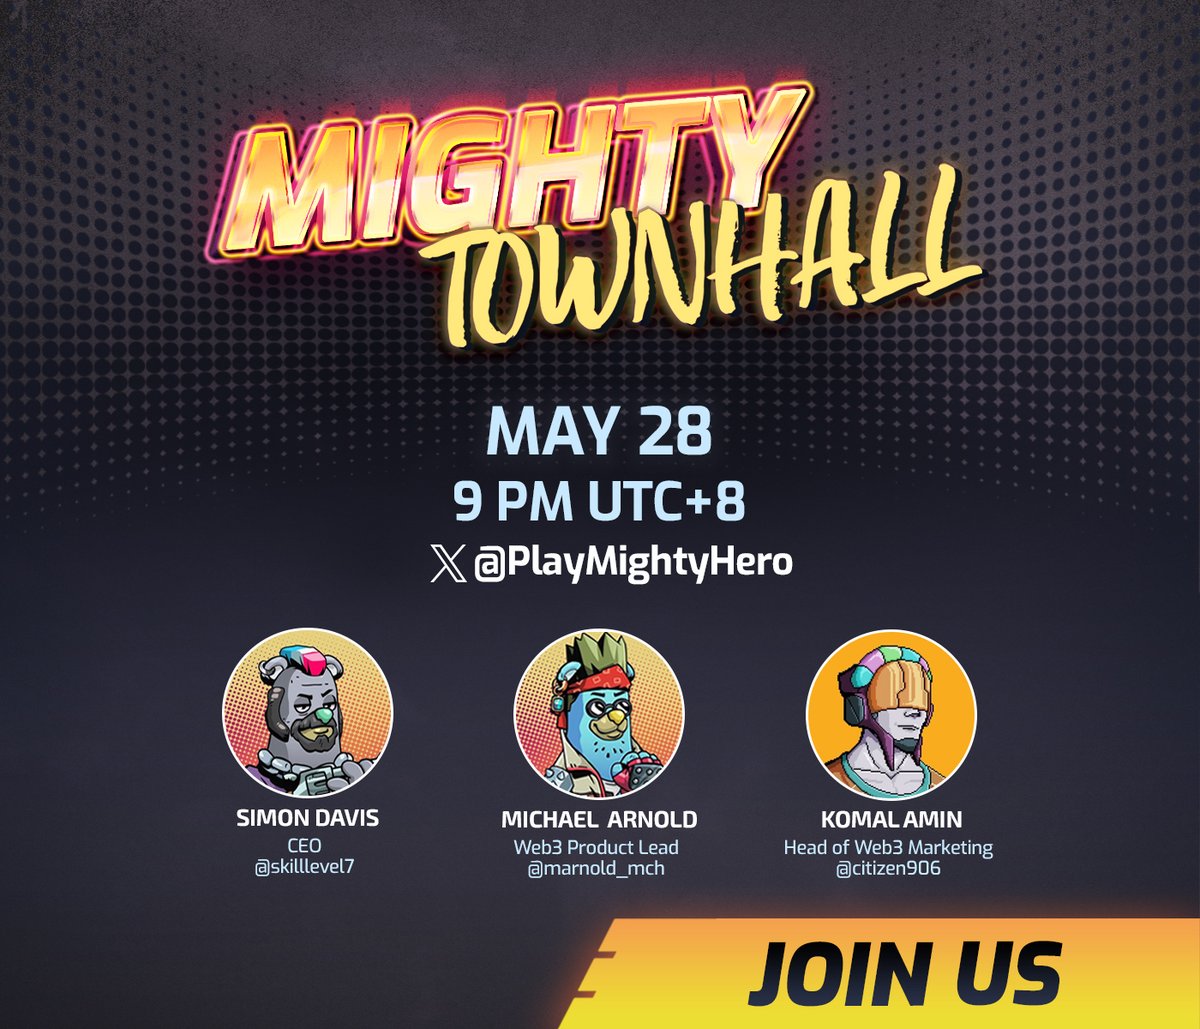 Next week's Townhall has so much alpha our bosses revoked access to the speaking notes. 🤫 Set your reminders for May 28 when @skilllevel7, @marnold_mch, and @citizen906 talk about [REDACTED].